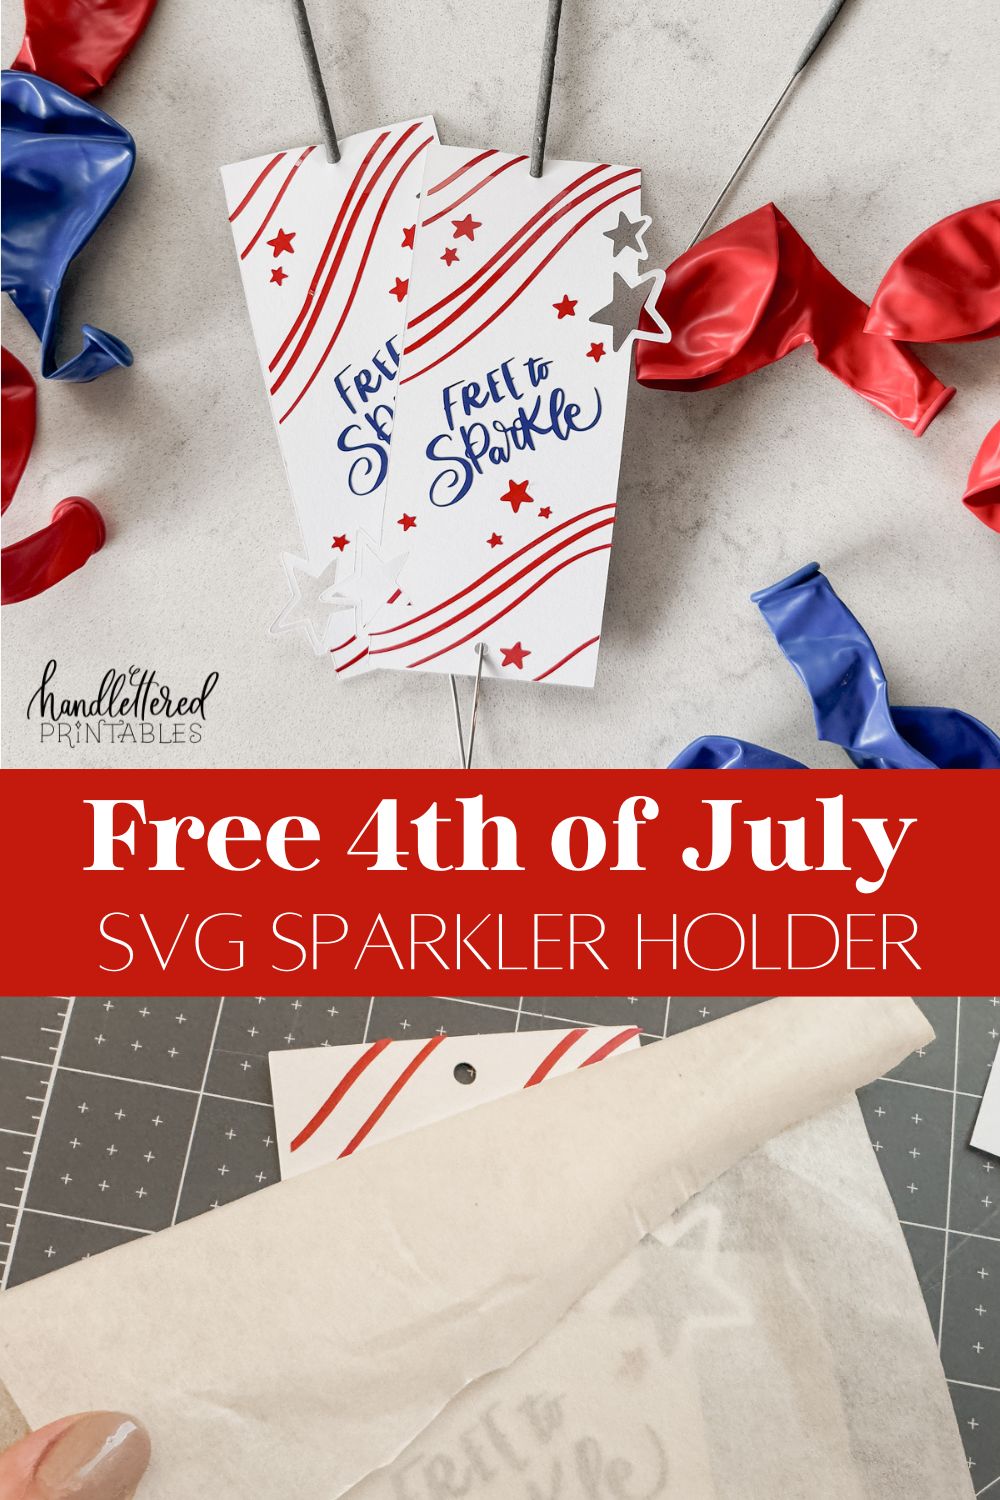 image of fourth of july sparklers holders free svg file with 3 layers, shown assembled with sparklers, being held by hand above a countertop with red and blue balloons text over reads: free 4th of july svg sparkler holder